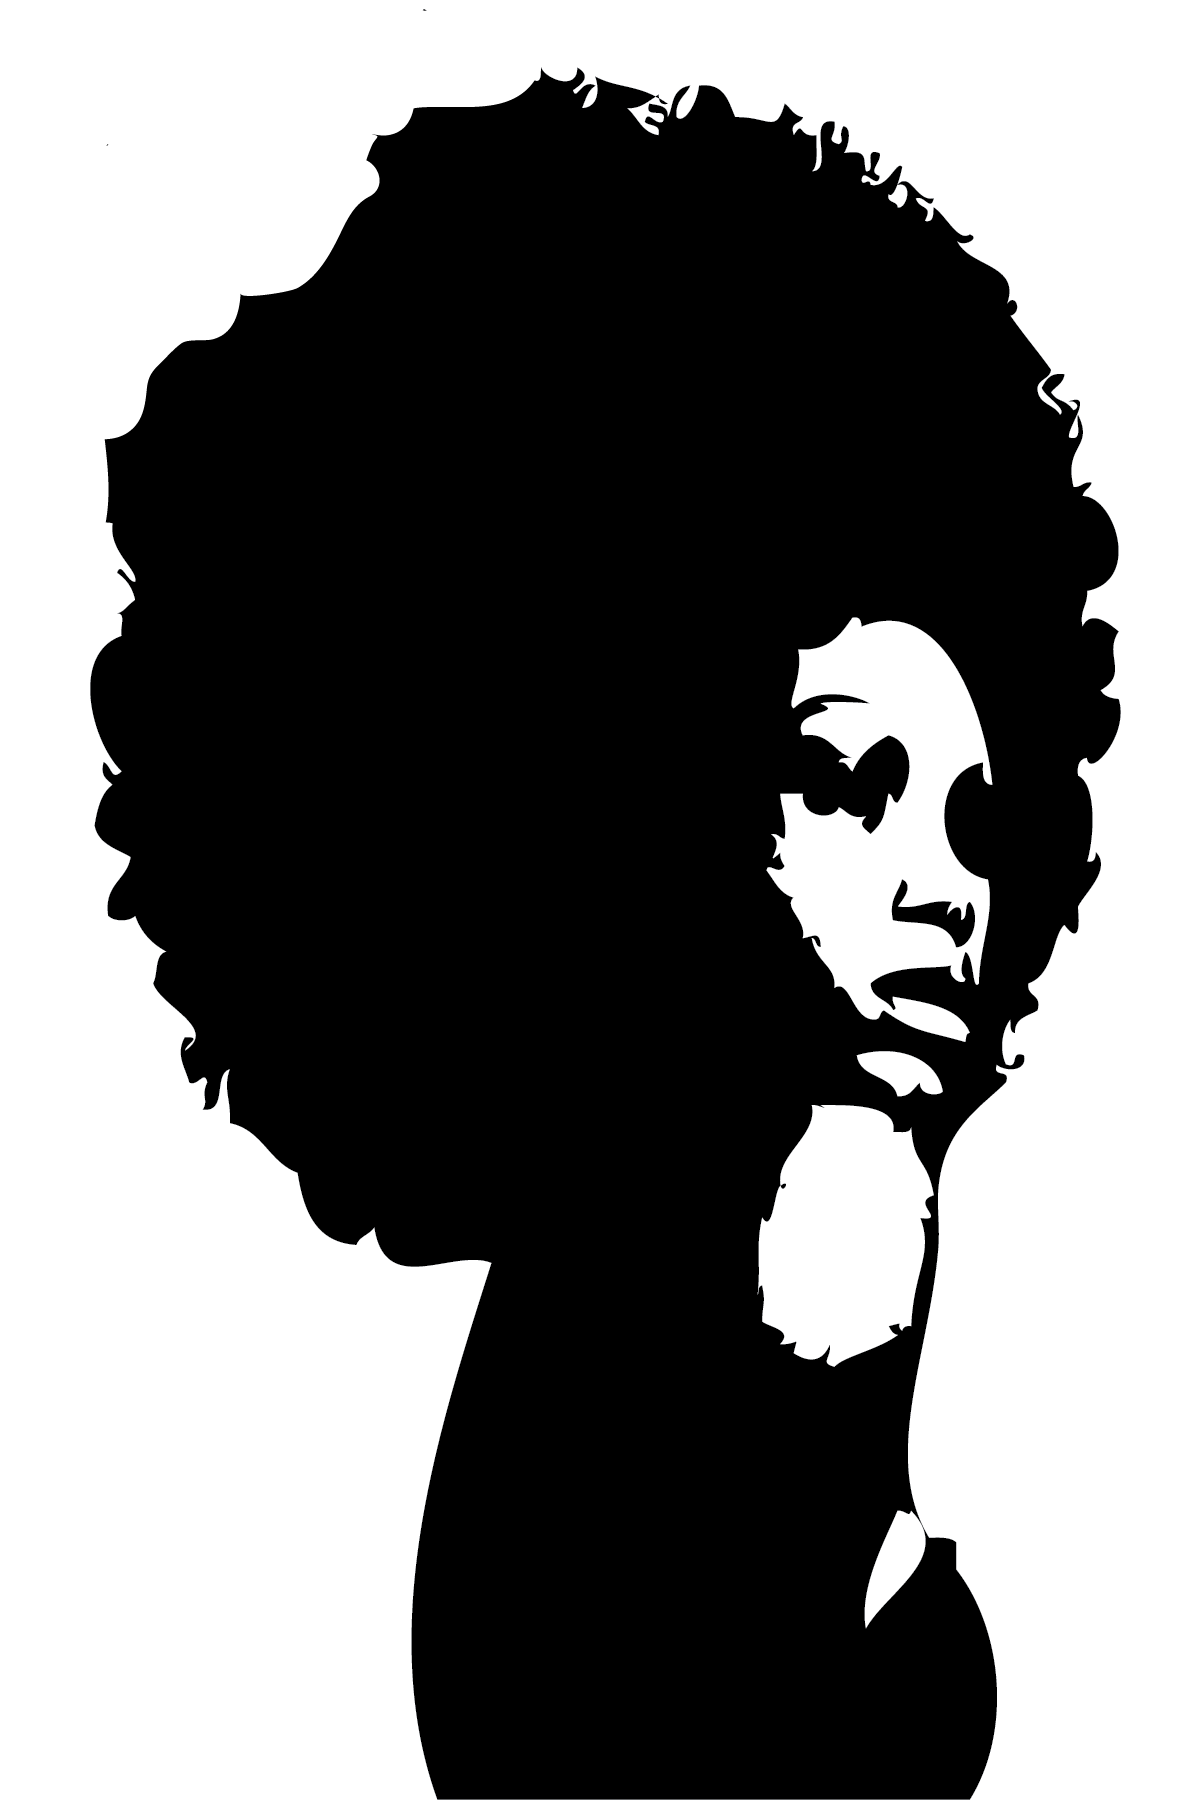 Silhouette Of A Black Woman 